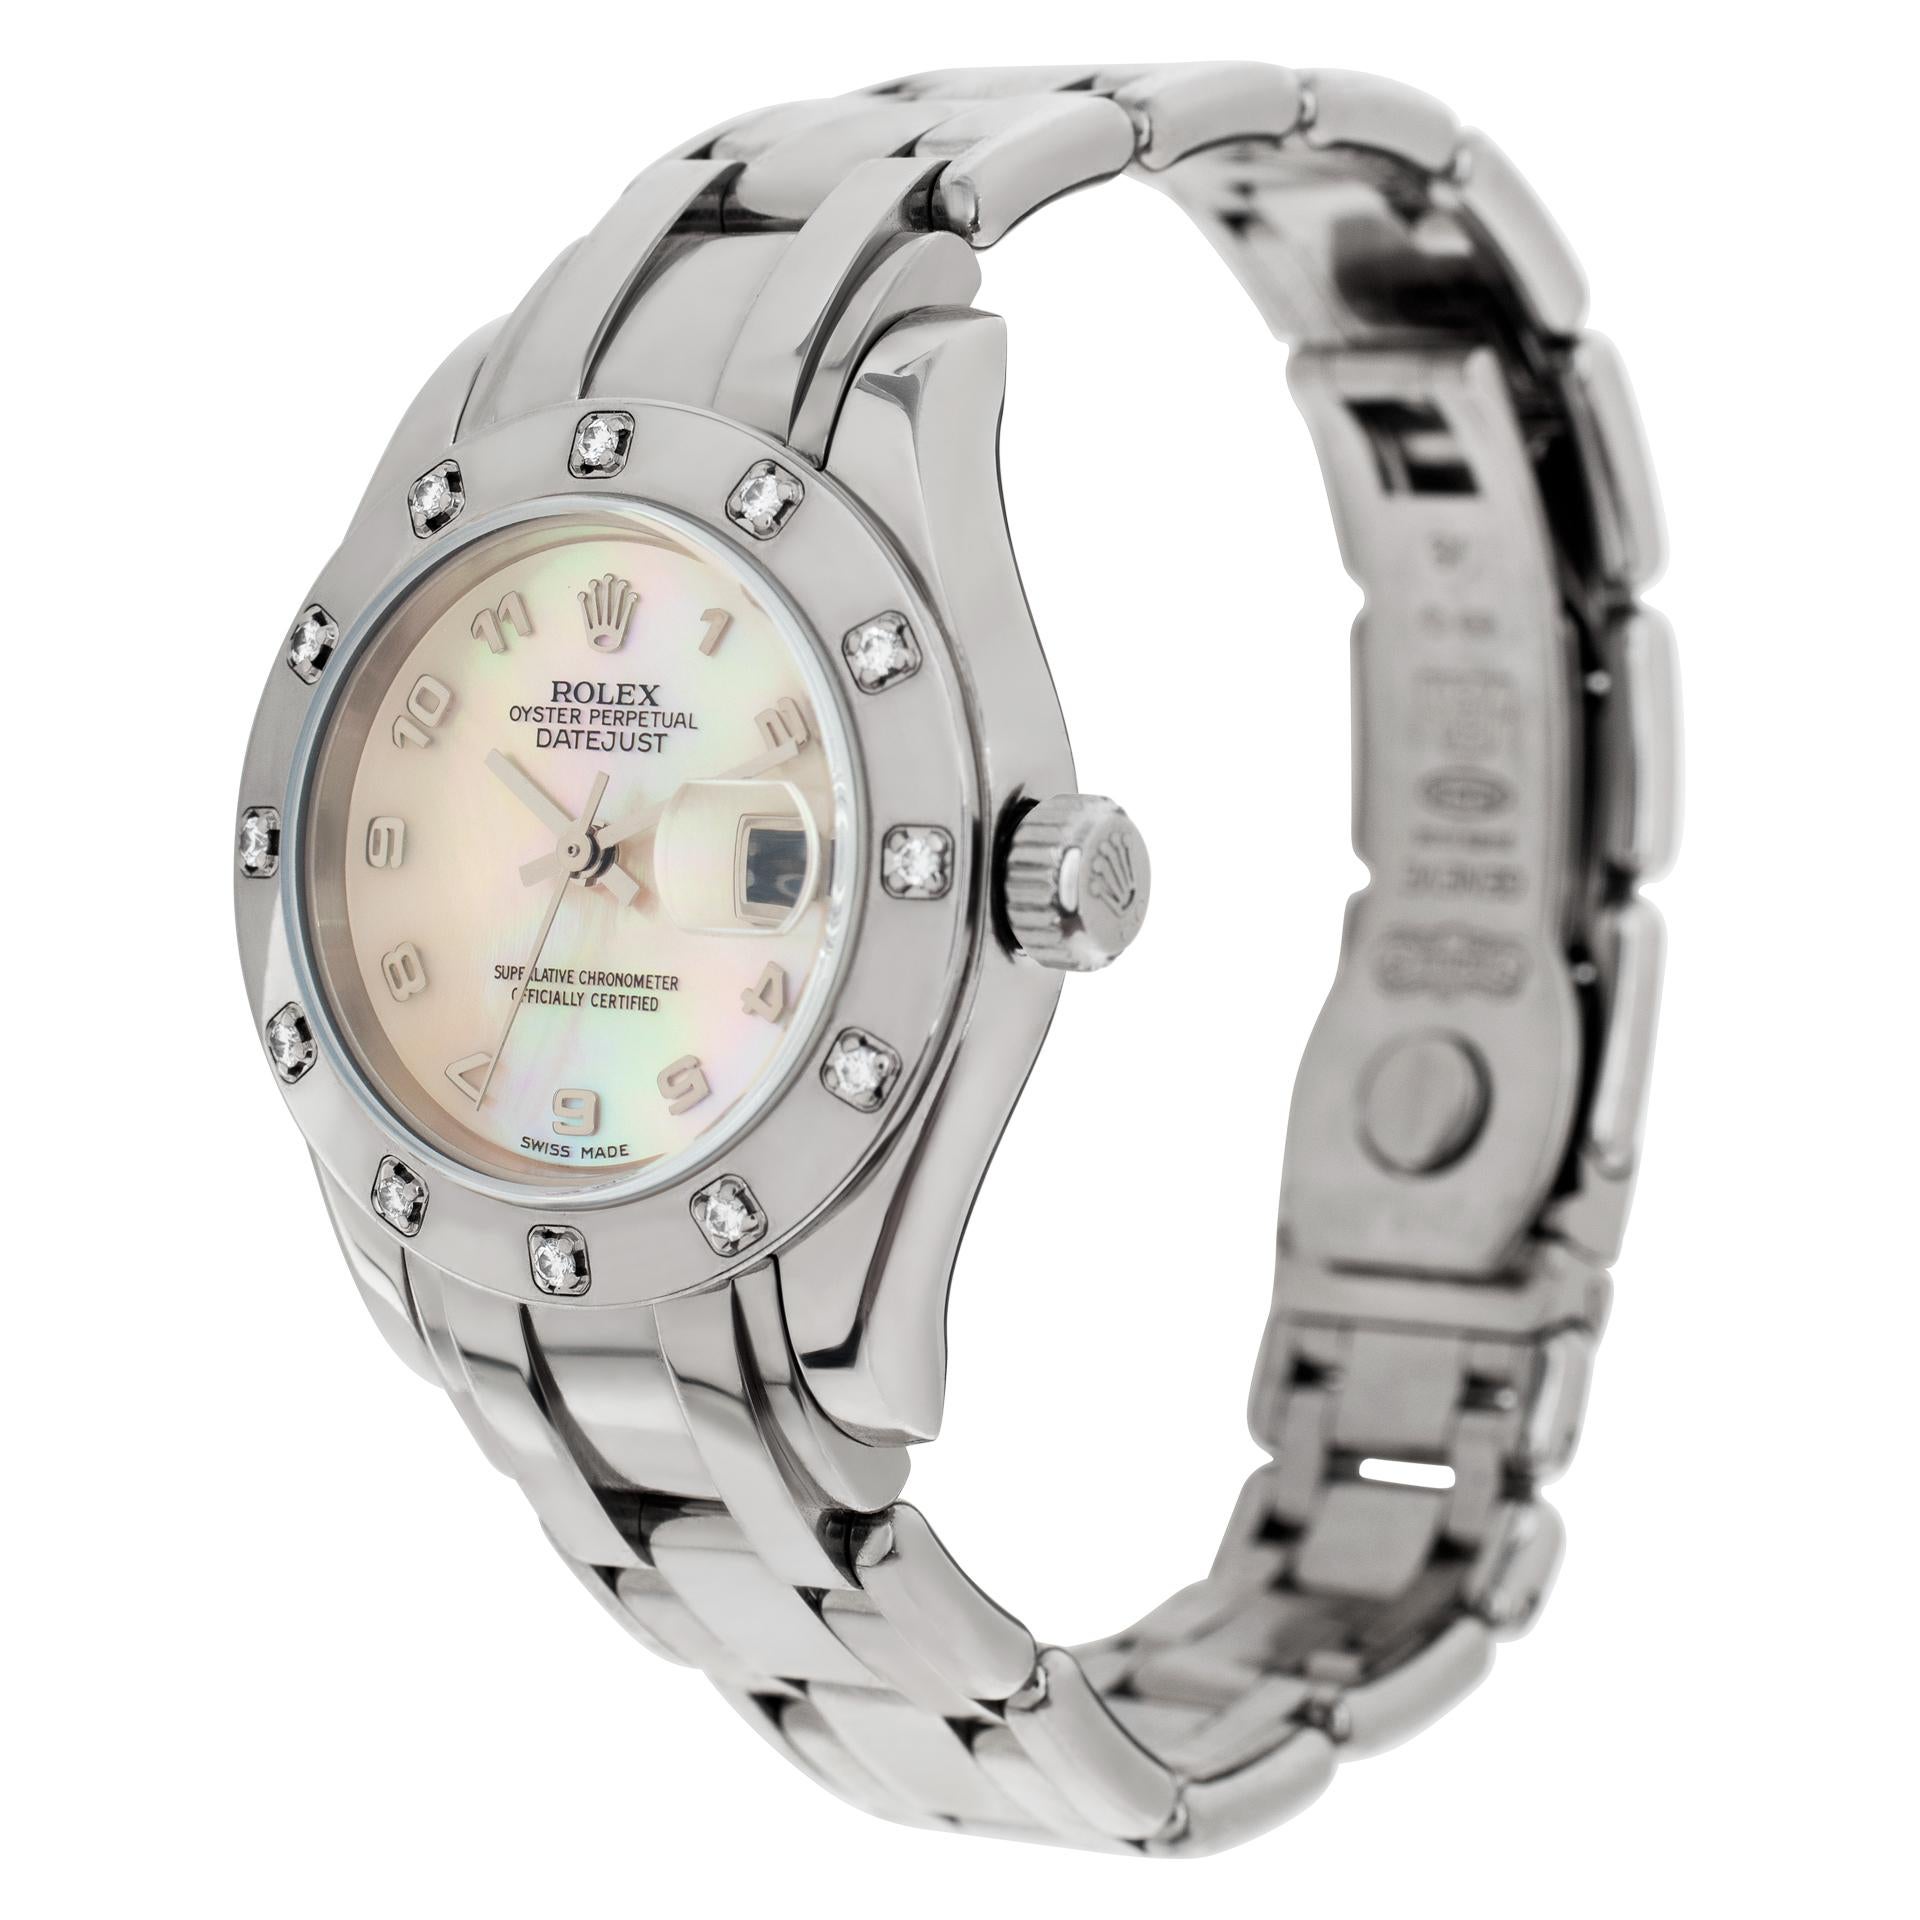 Rolex Pearlmaster in 18k white gold w/ white mother of pearl dial and diamond bezel. Auto w/ sweep seconds and date. 28 mm case size. **Bank wire only at this price** Ref 80319. Circa 2000. Fine Pre-owned Rolex Watch. Certified preowned Dress Rolex